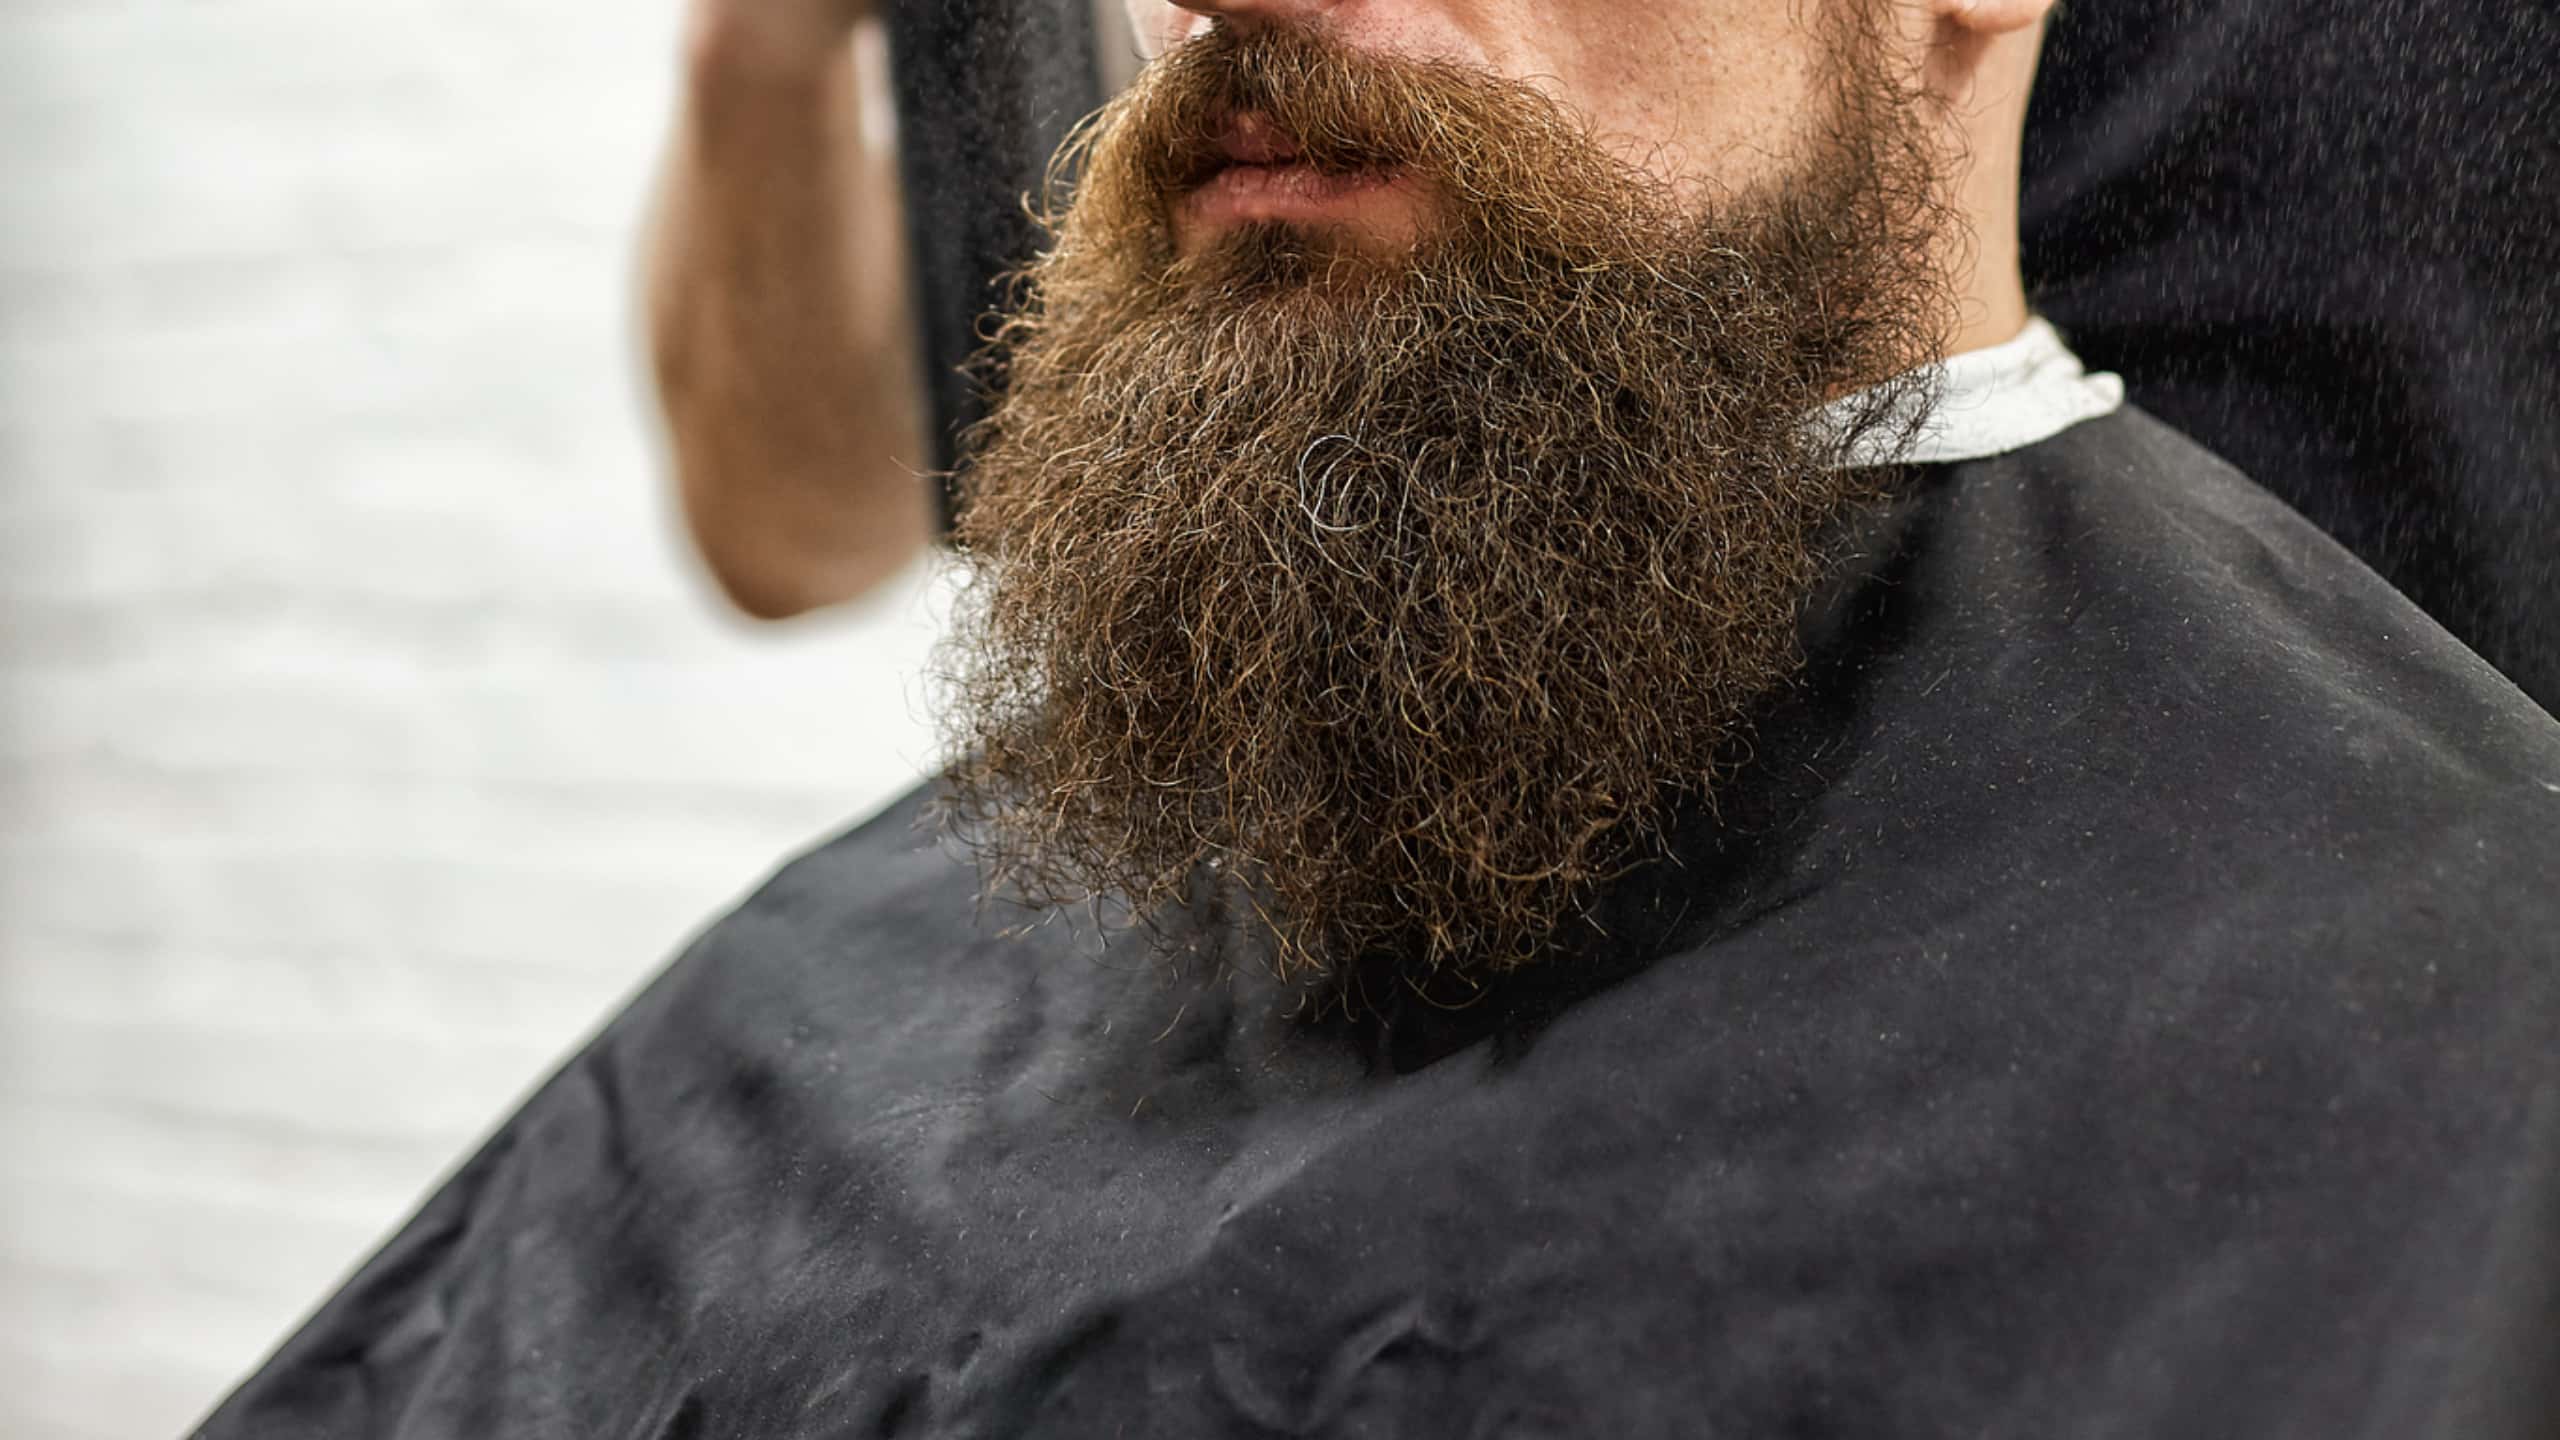 What Should You Know About Properly Trimming and Shaping Your Beard? 